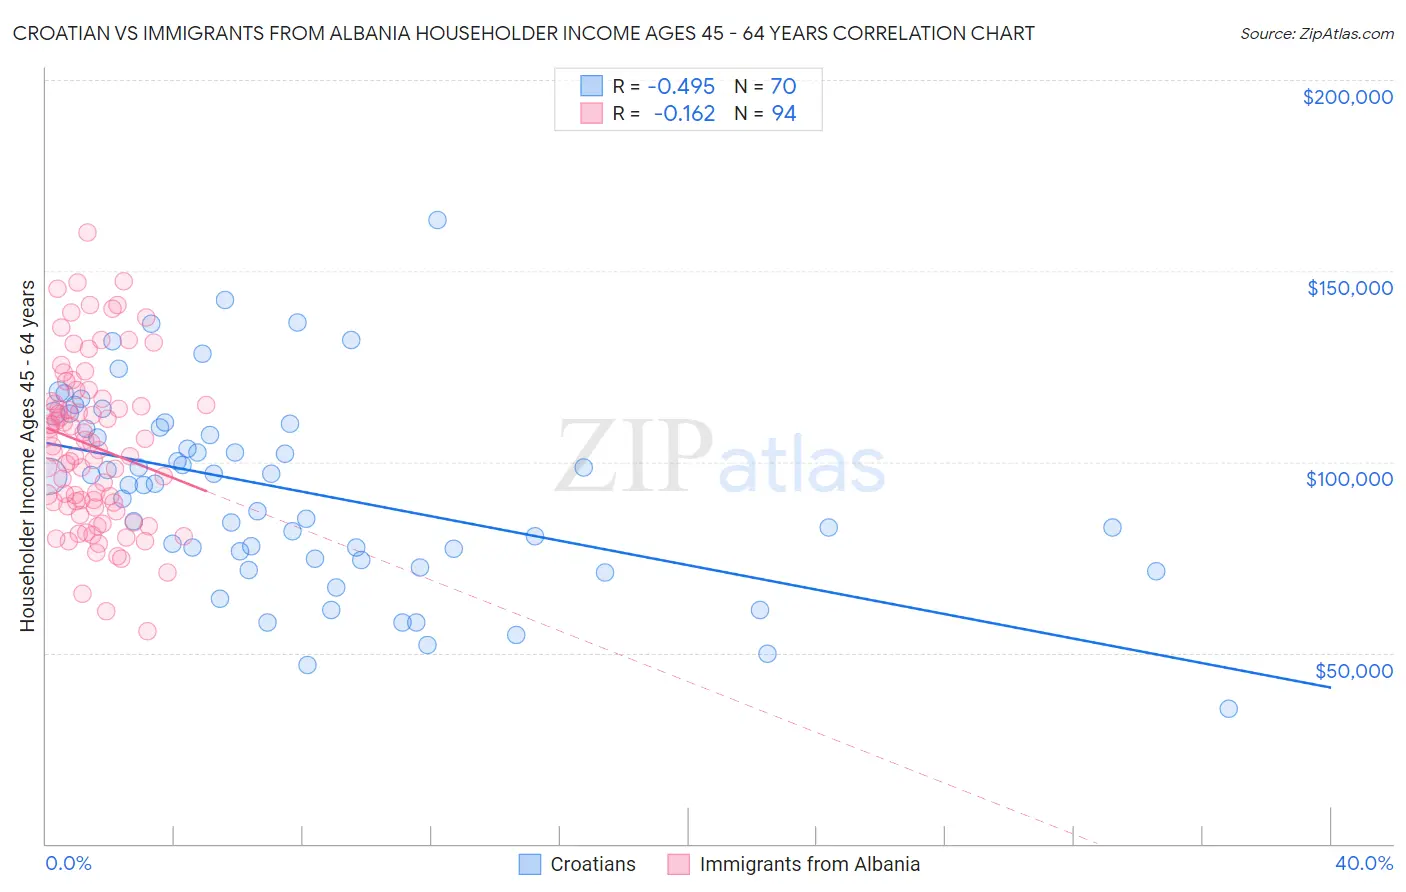 Croatian vs Immigrants from Albania Householder Income Ages 45 - 64 years